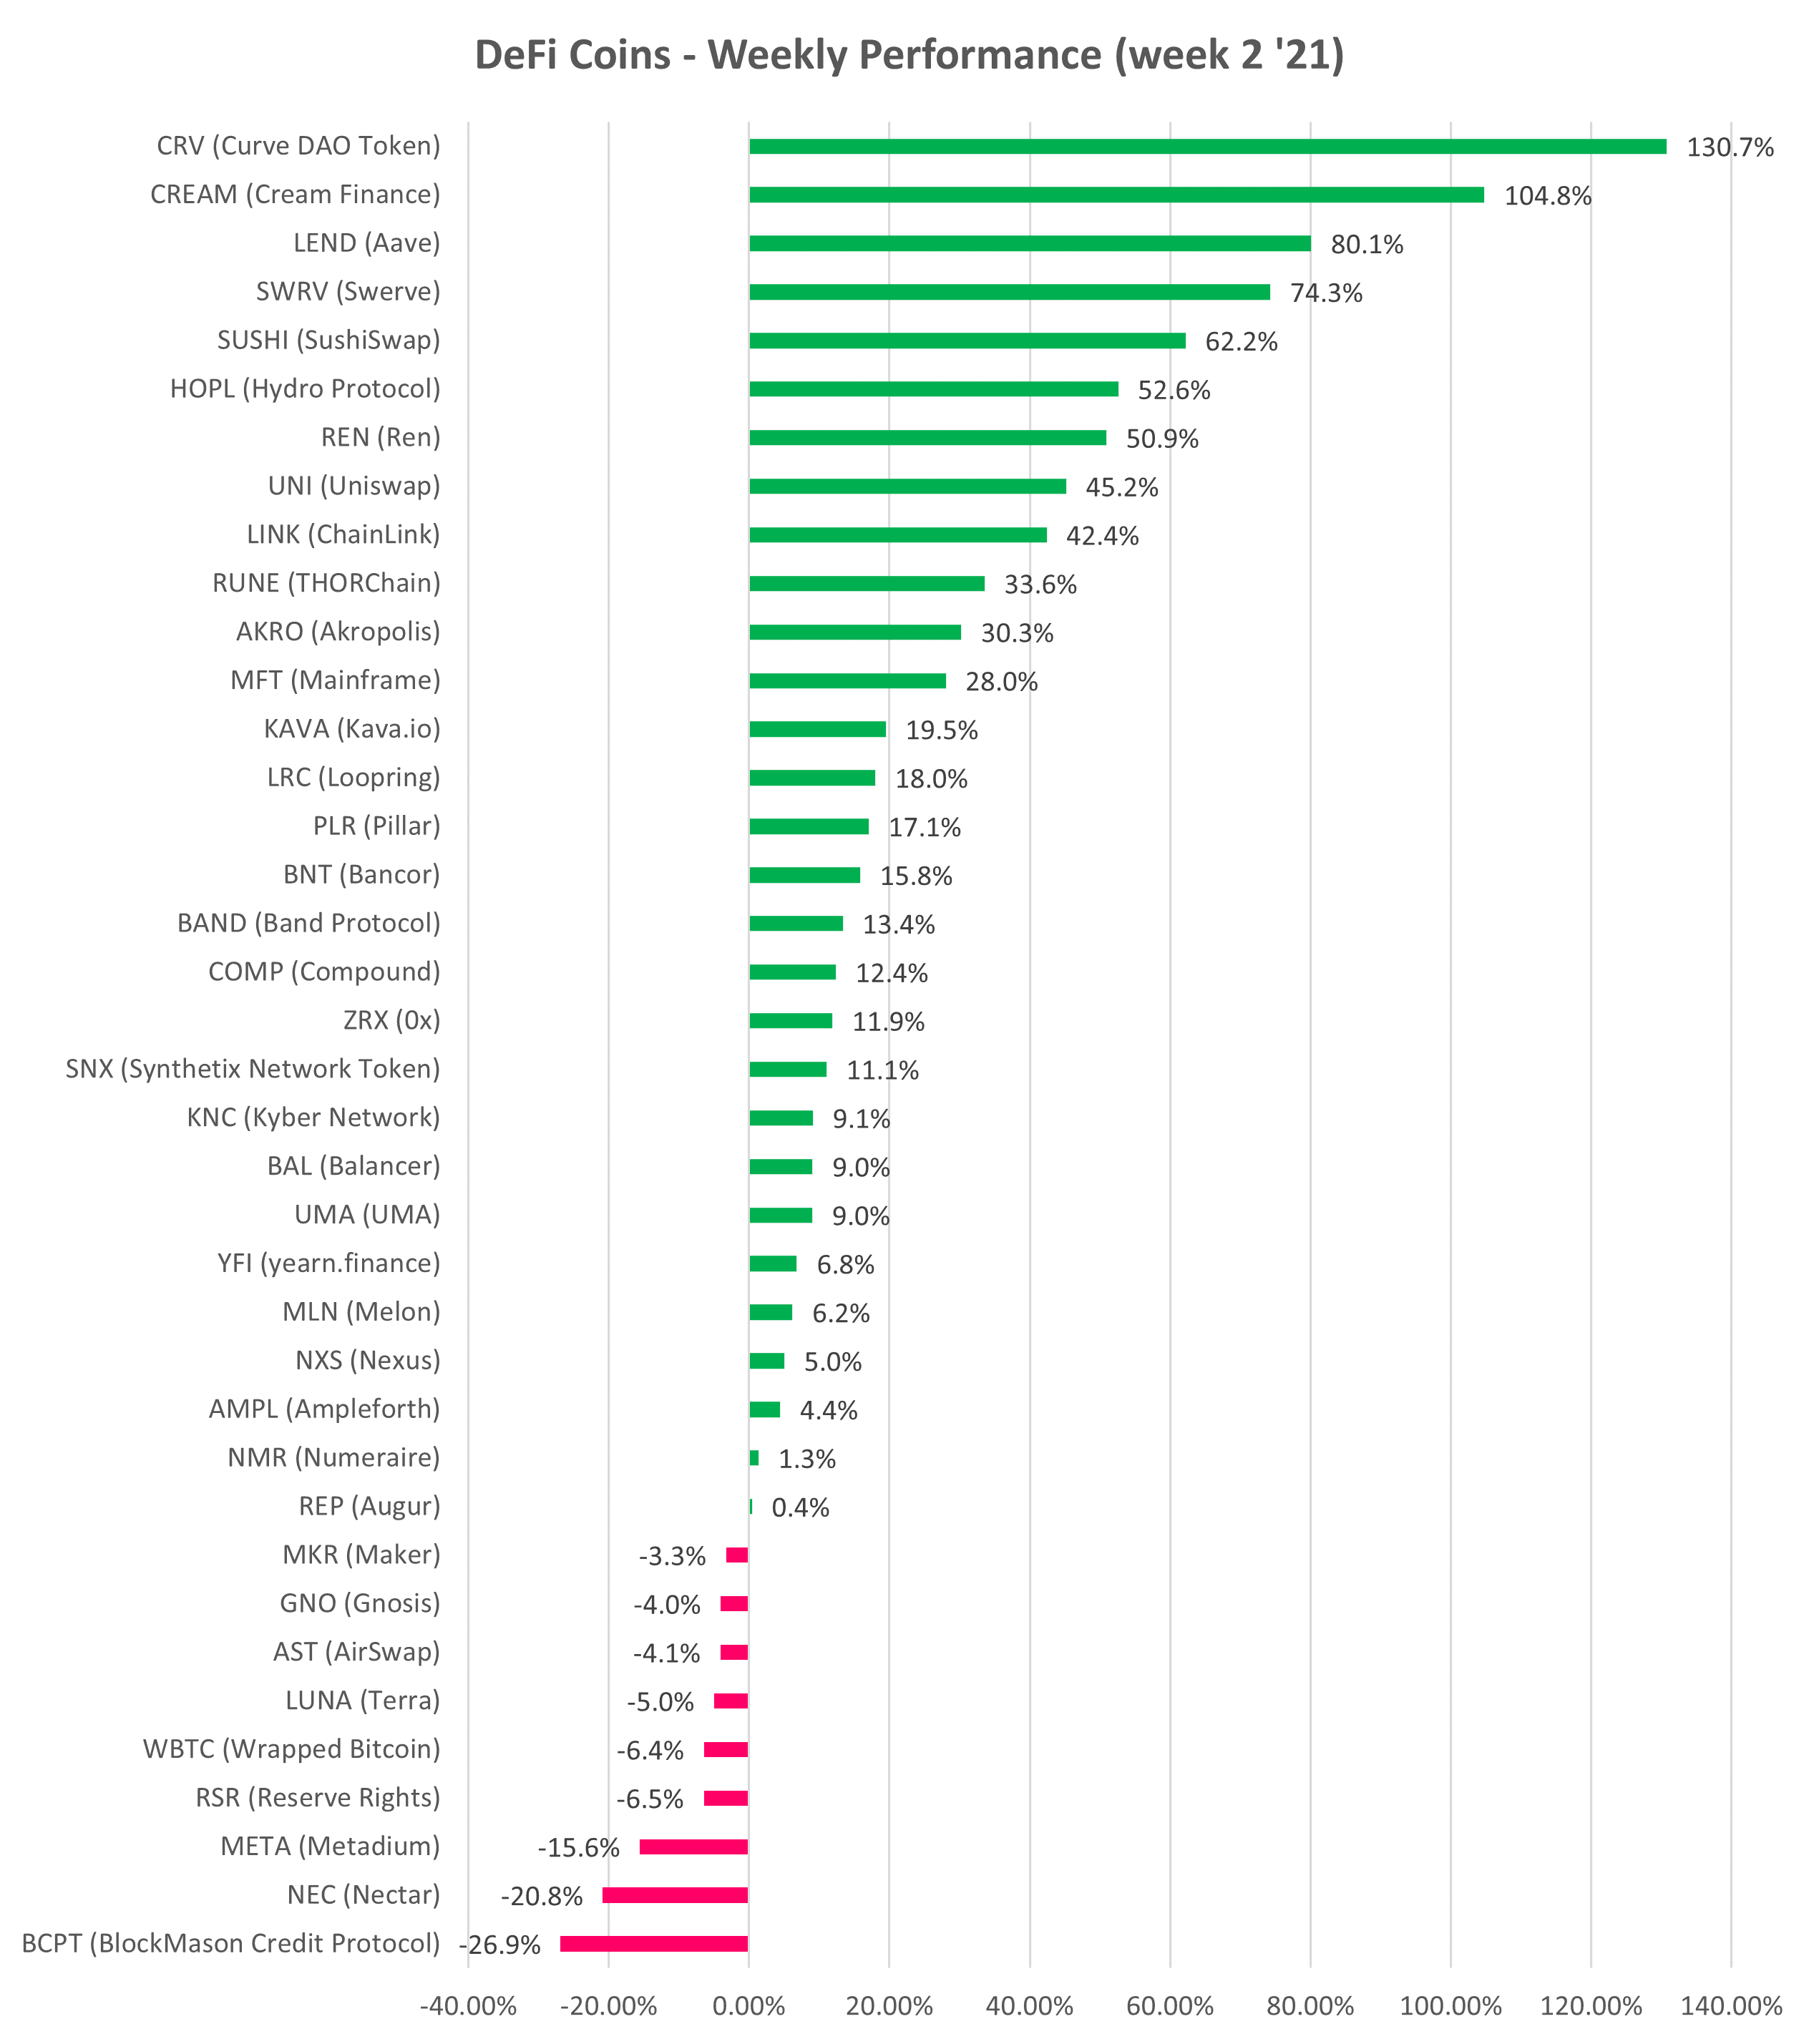 Top DeFi Cryptocurrency Price Gainers and Losers - week 2 of year 2021